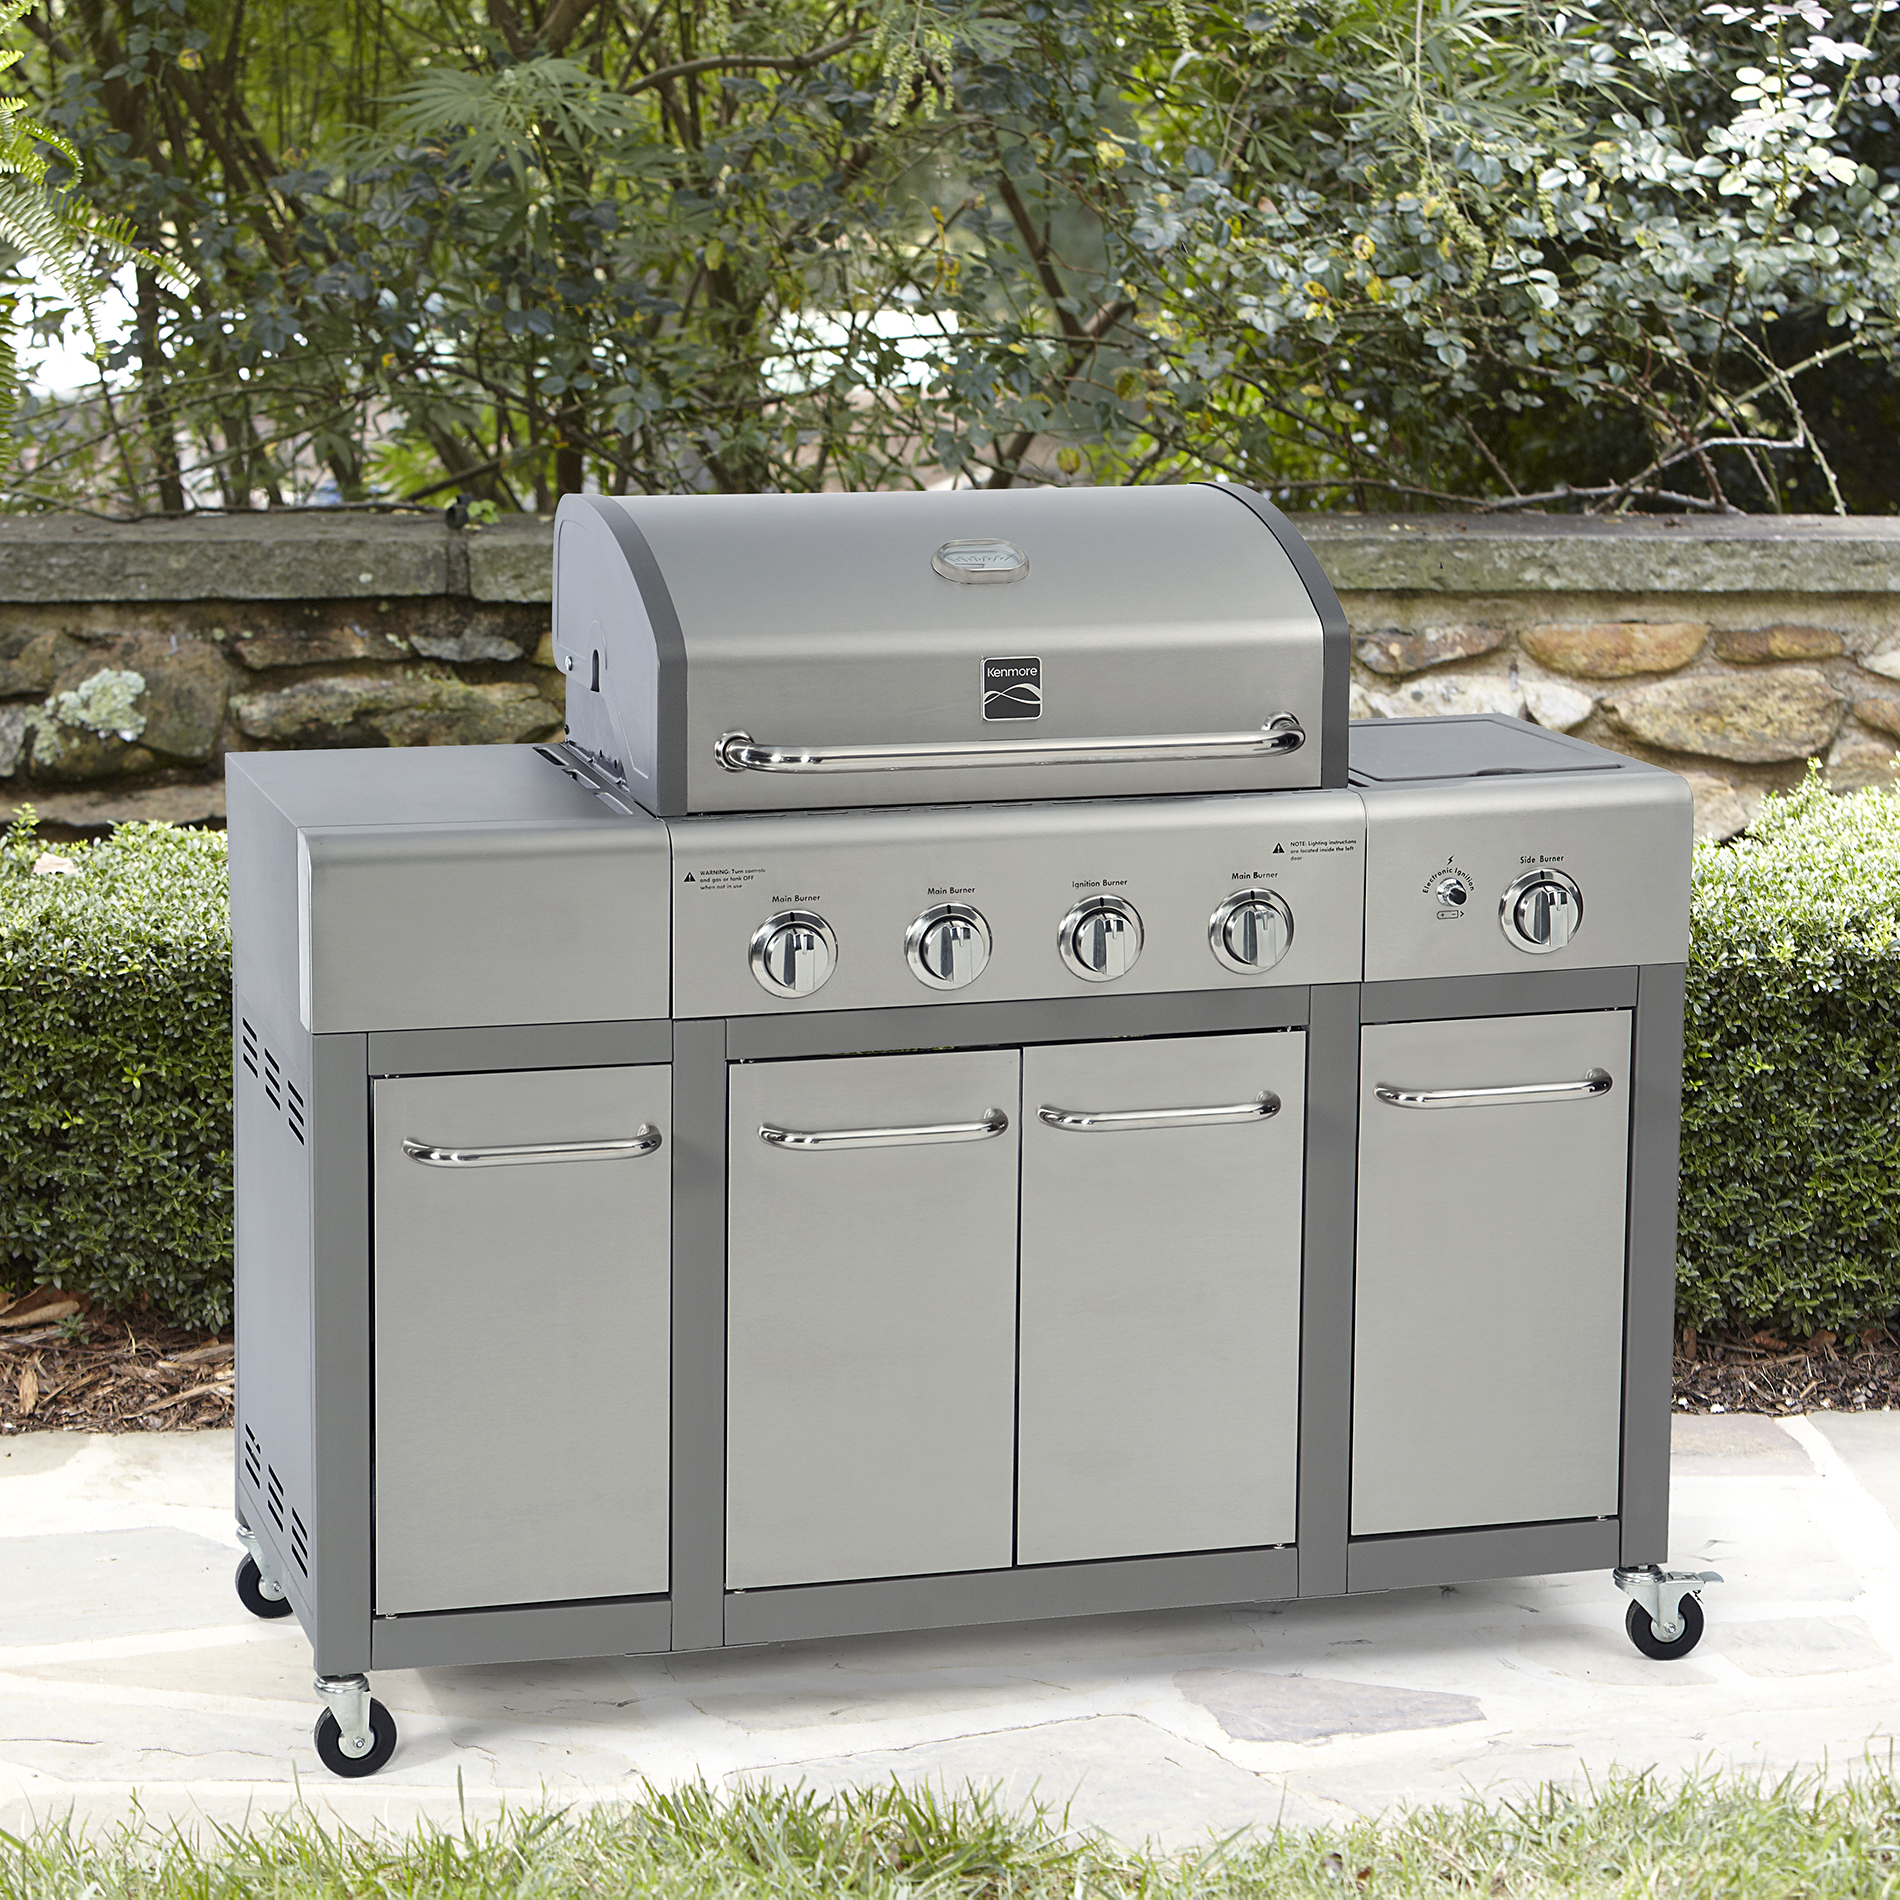 Kenmore 4 Burner Stainless Steel Lid Gas Grill with Storage